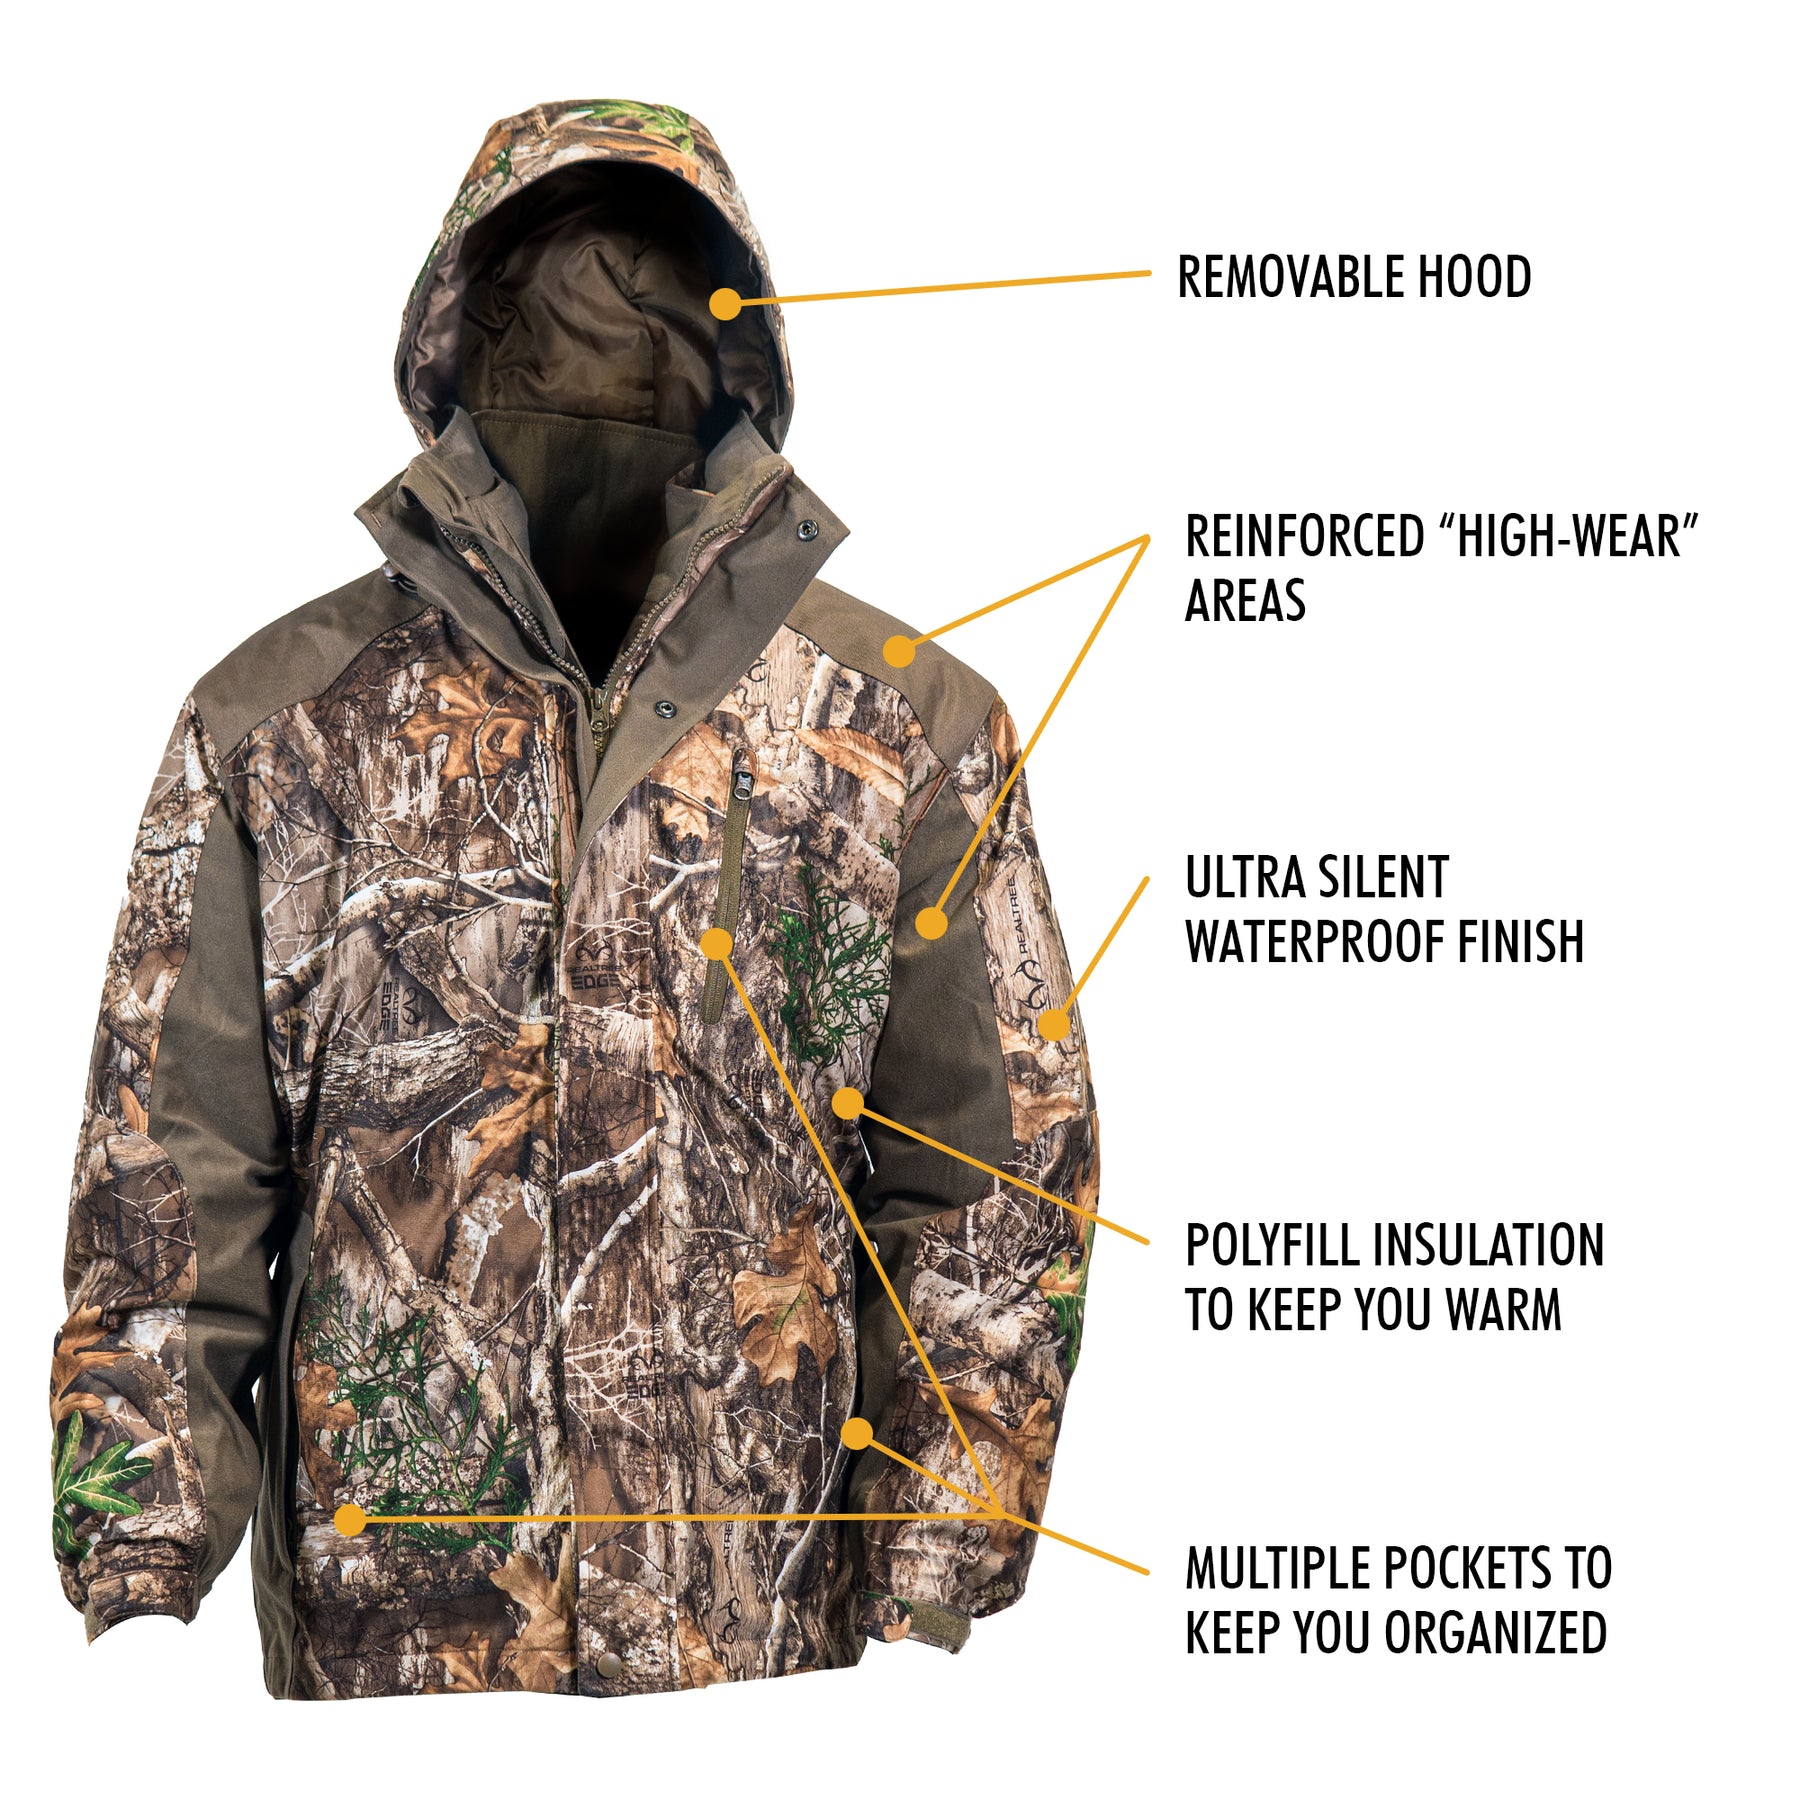 Realtree AP Camo Fishing Suit With Waterproof Snow Jackets Men